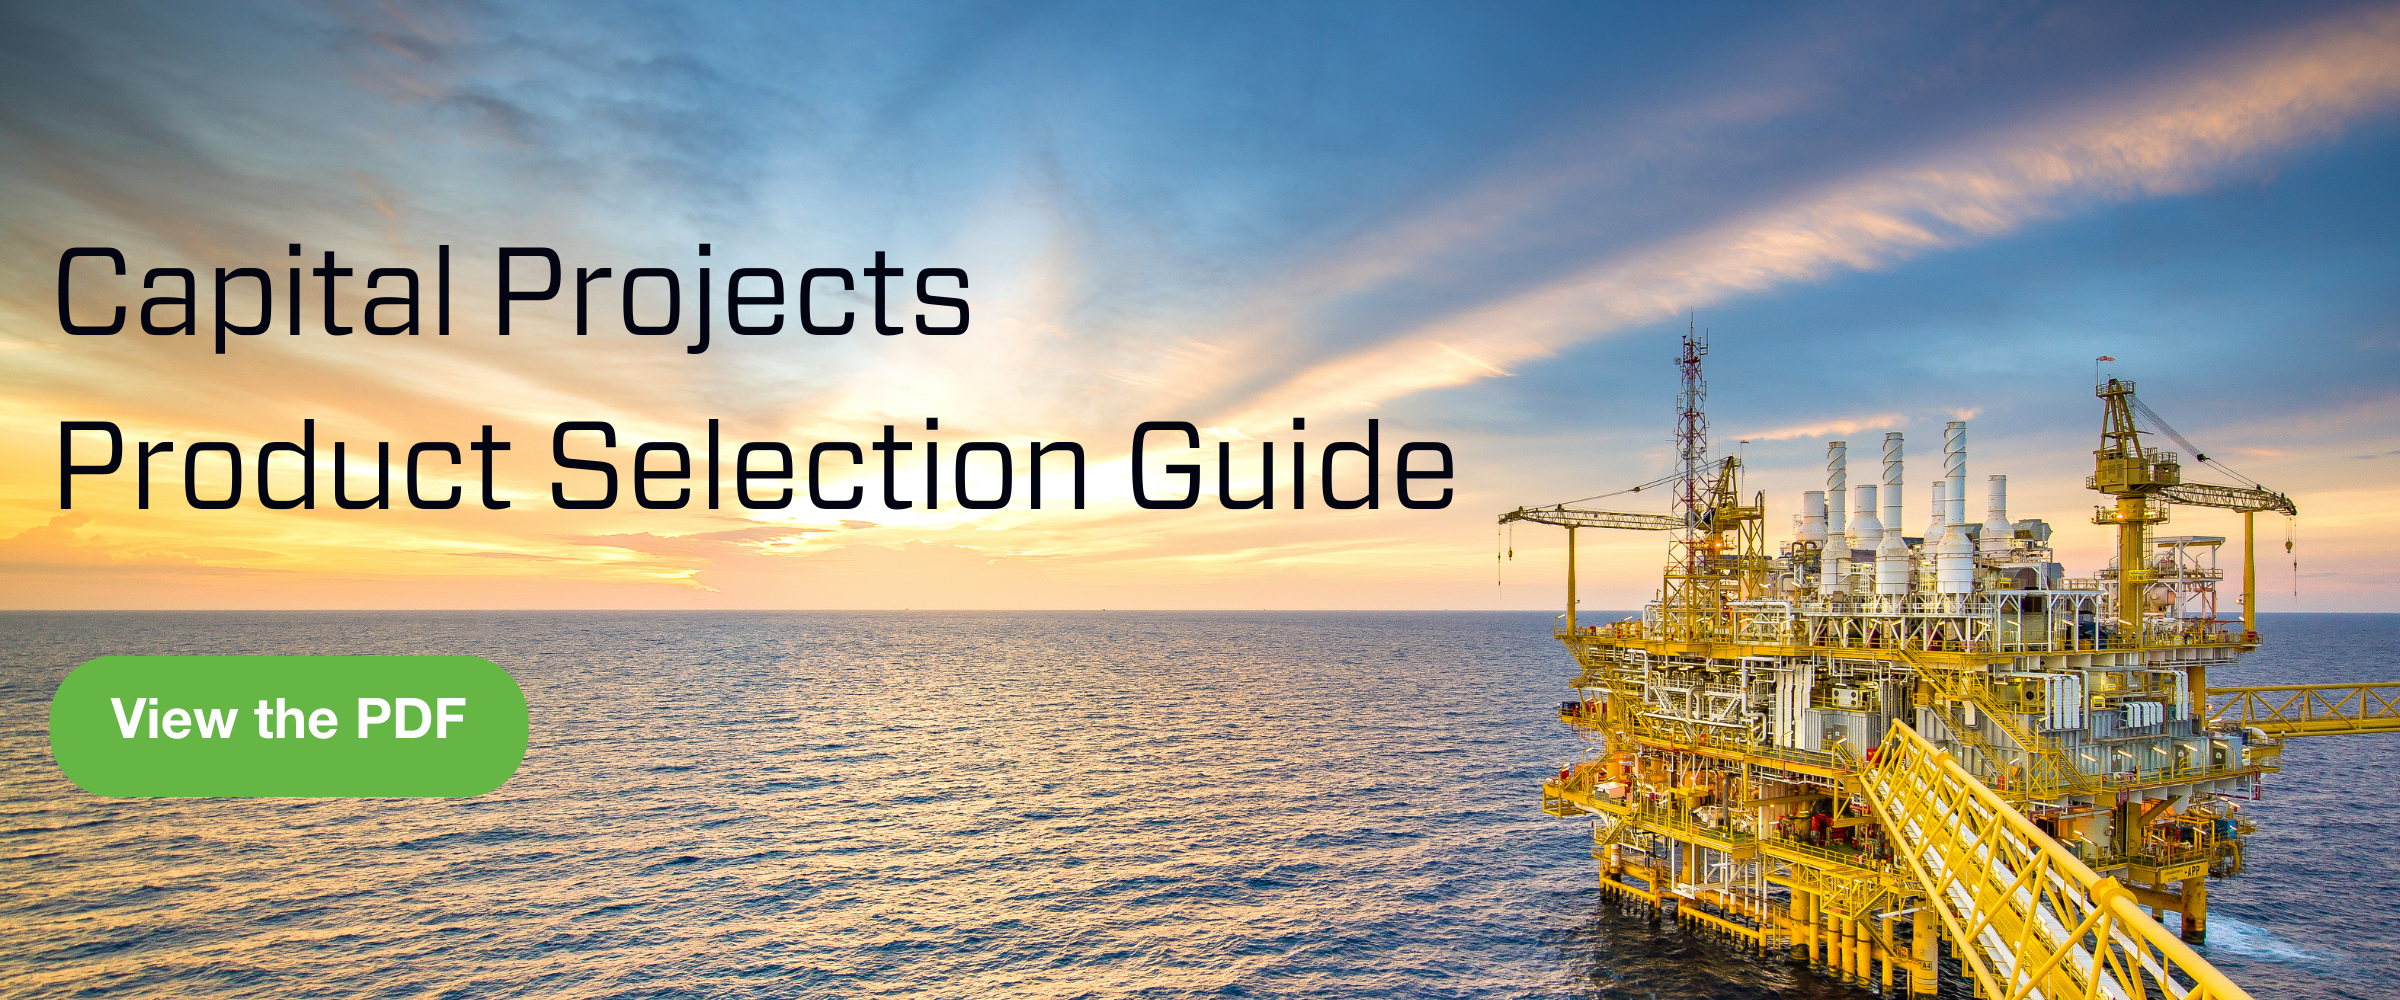 Capital Projects Product Selection Guide